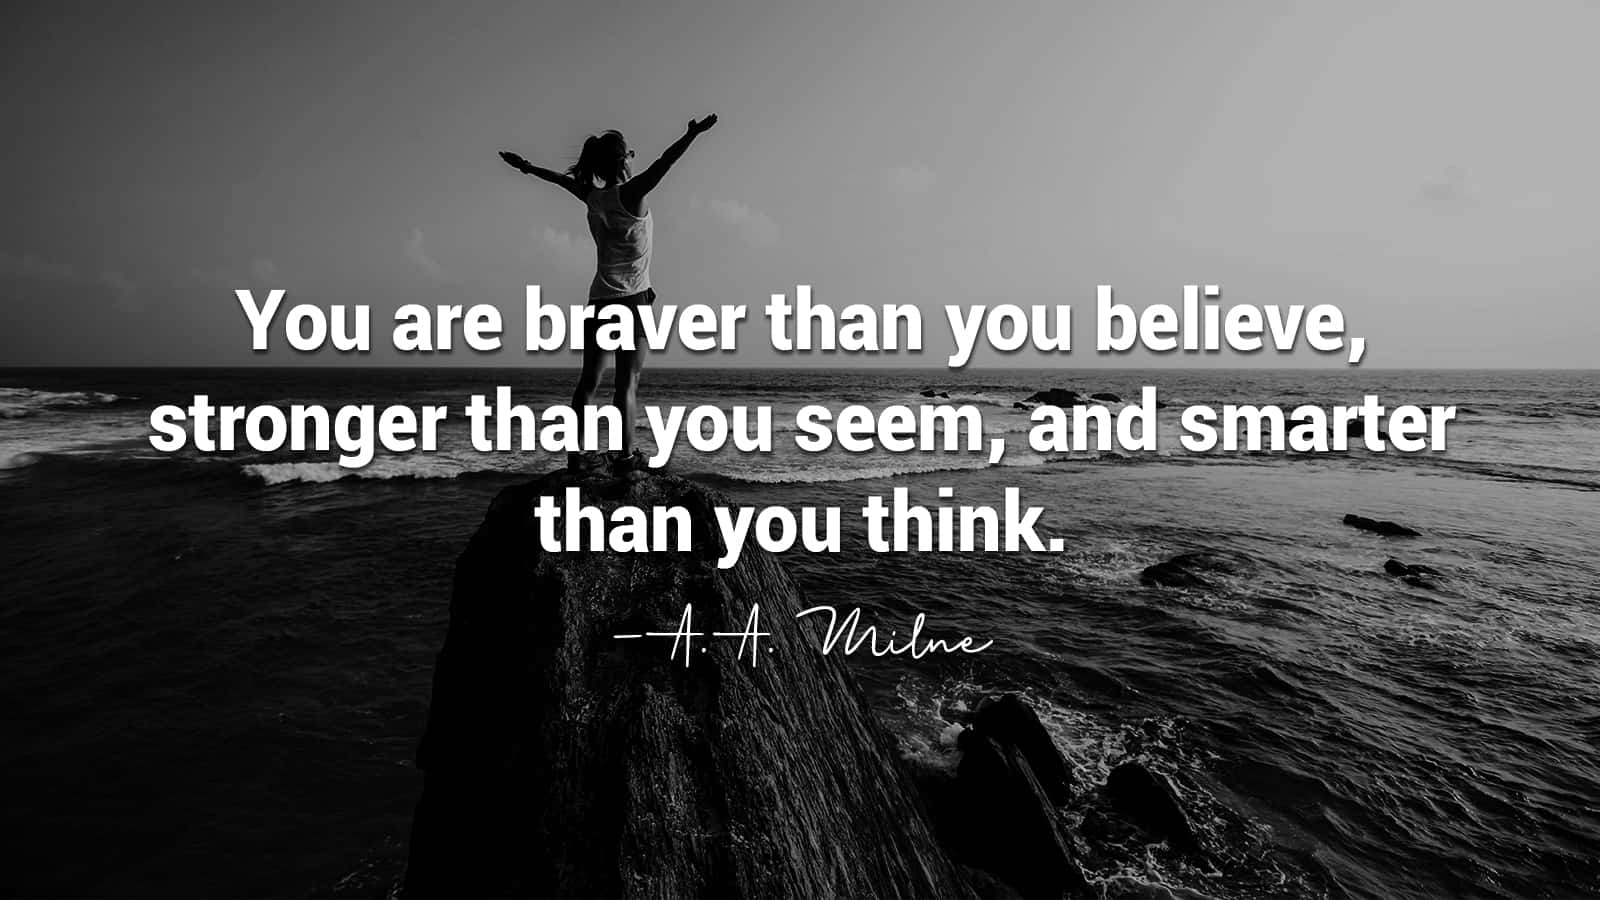 17 Quotes That Prove That You’re Braver Than You Think